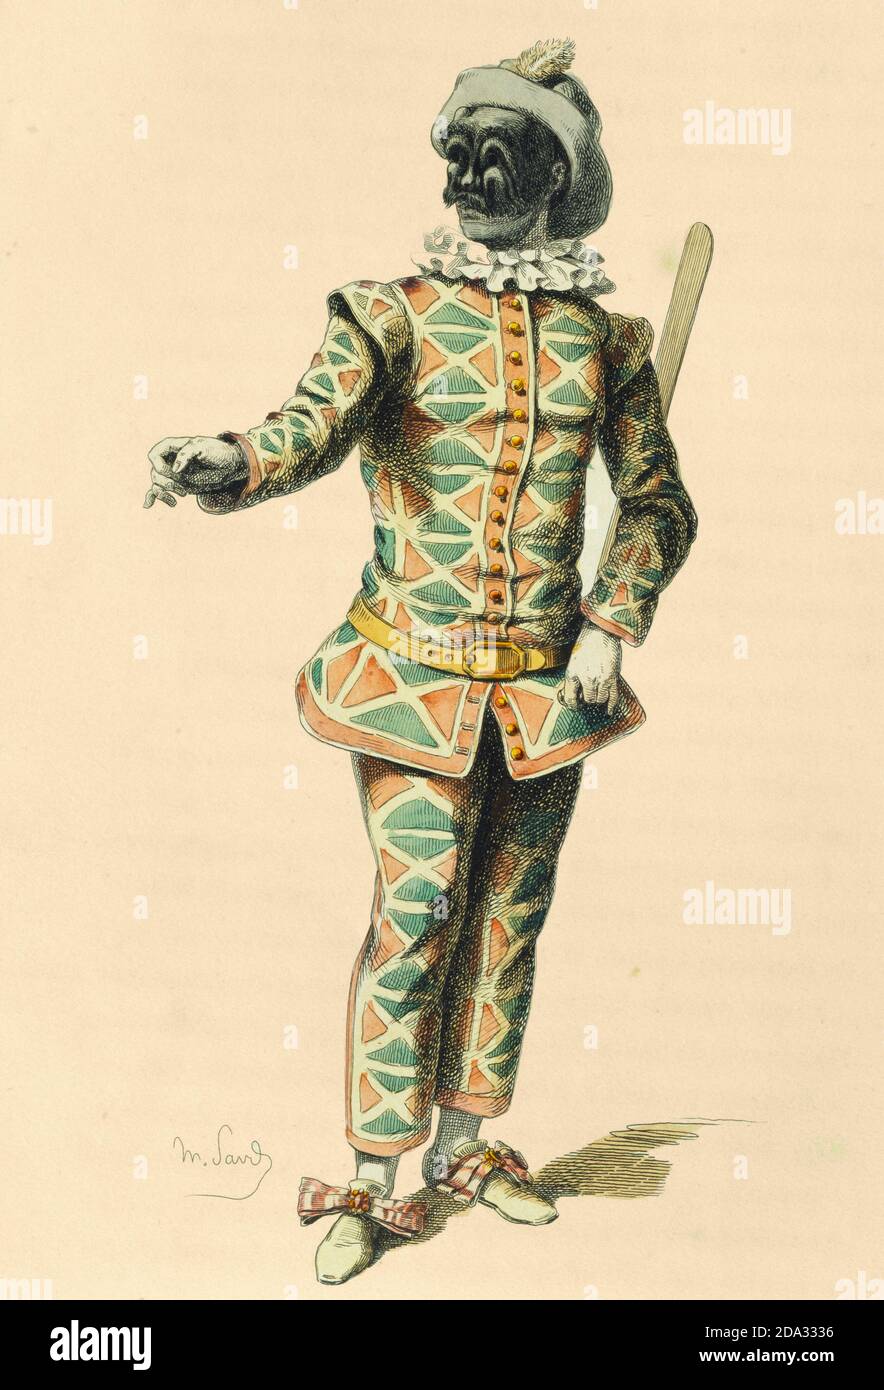 Harlequin - drawing by Maurice Sand, published in 1860. Commedia dell' Arte character Stock Photo